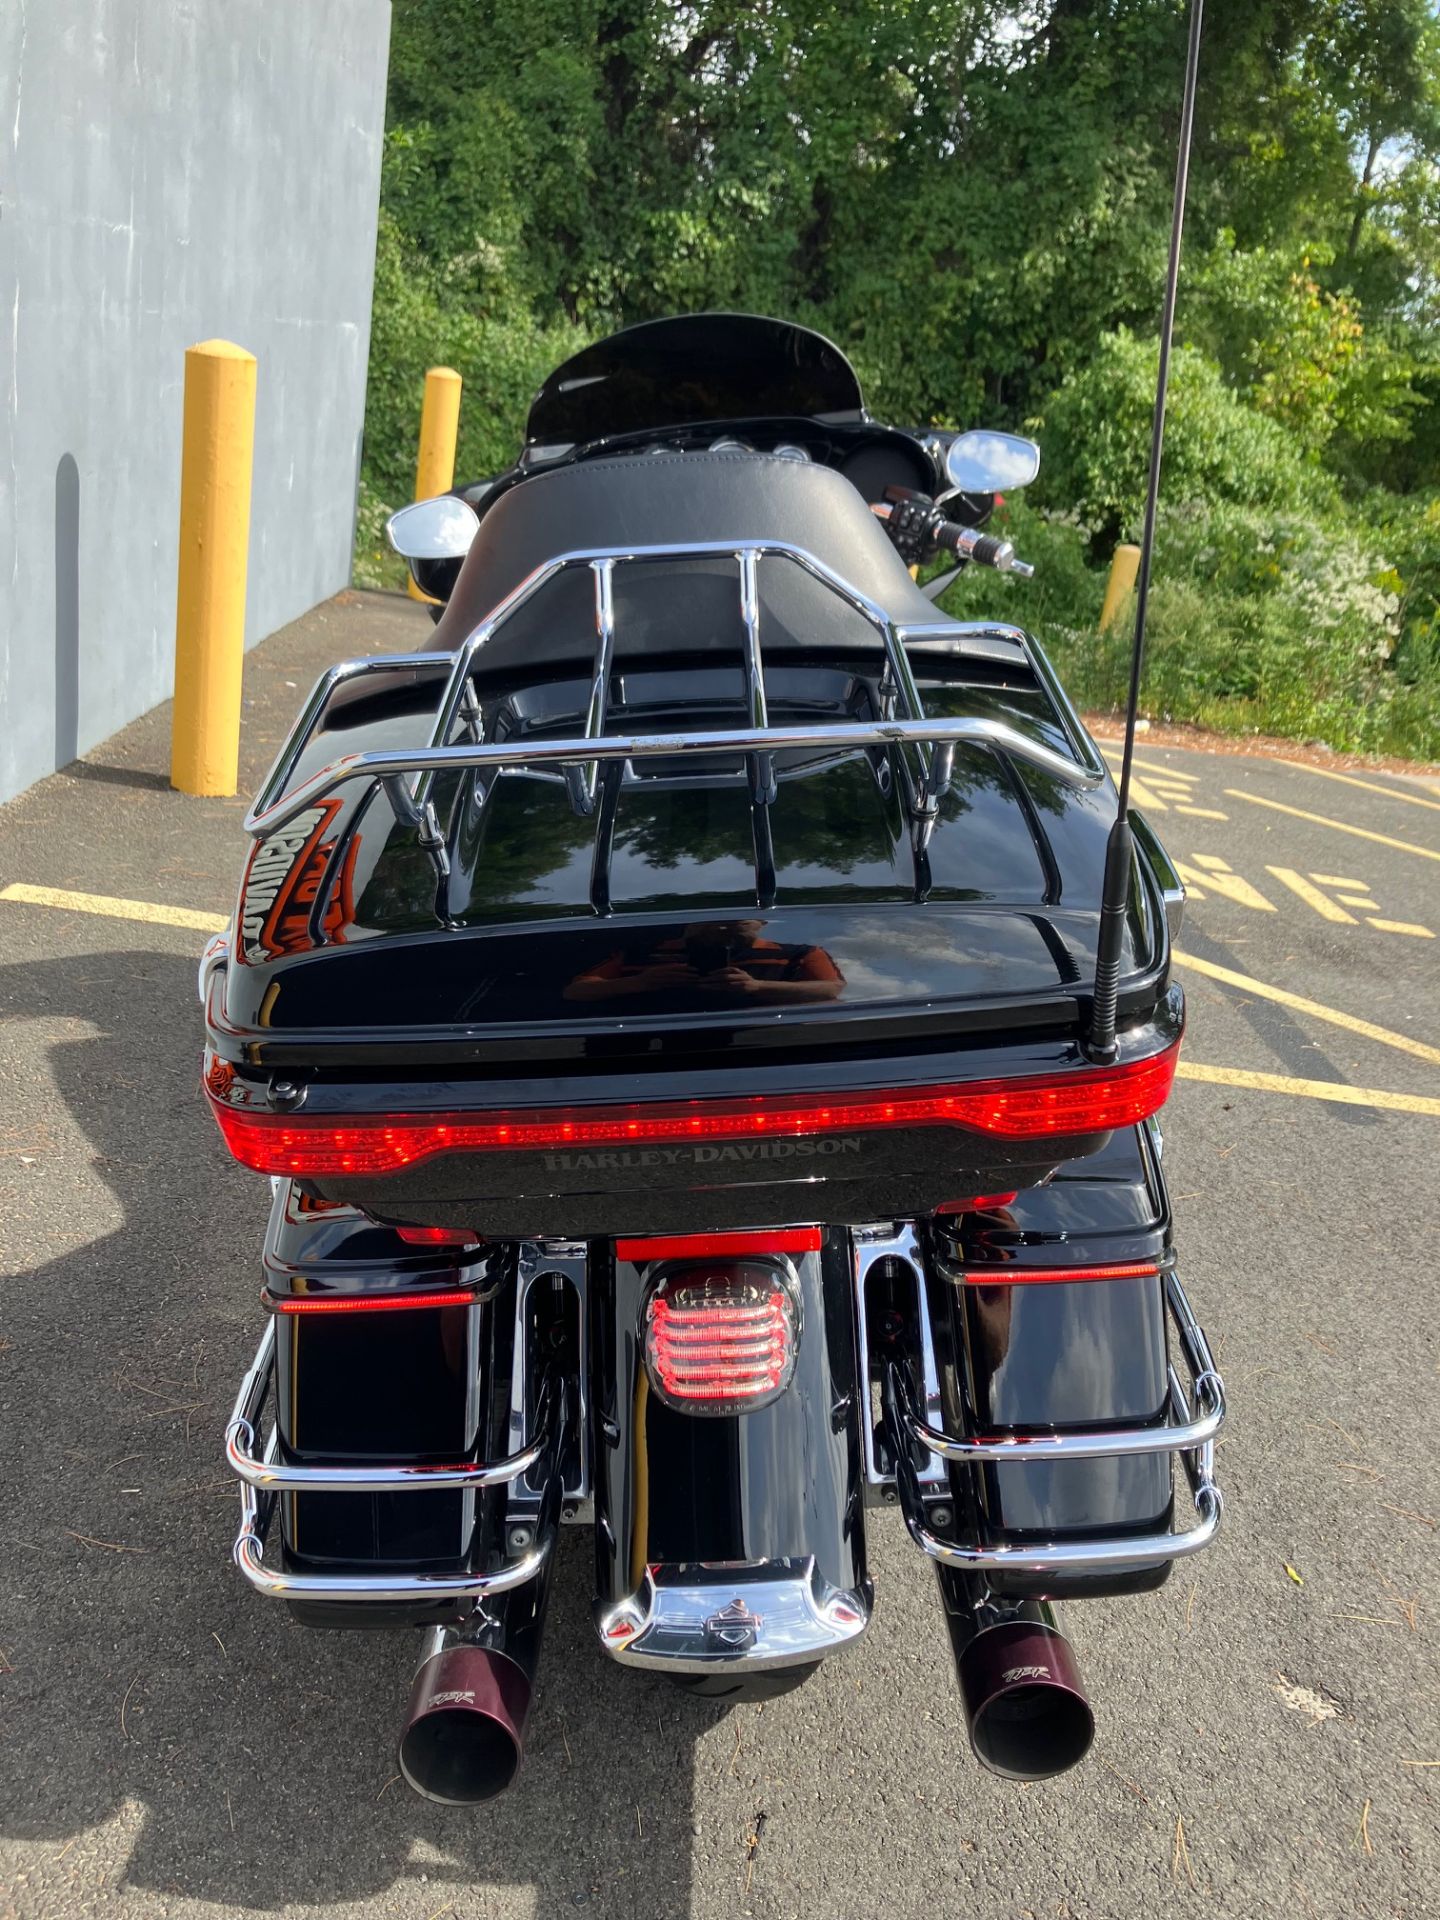 2018 Harley-Davidson ULTRA LIMITED in West Long Branch, New Jersey - Photo 6